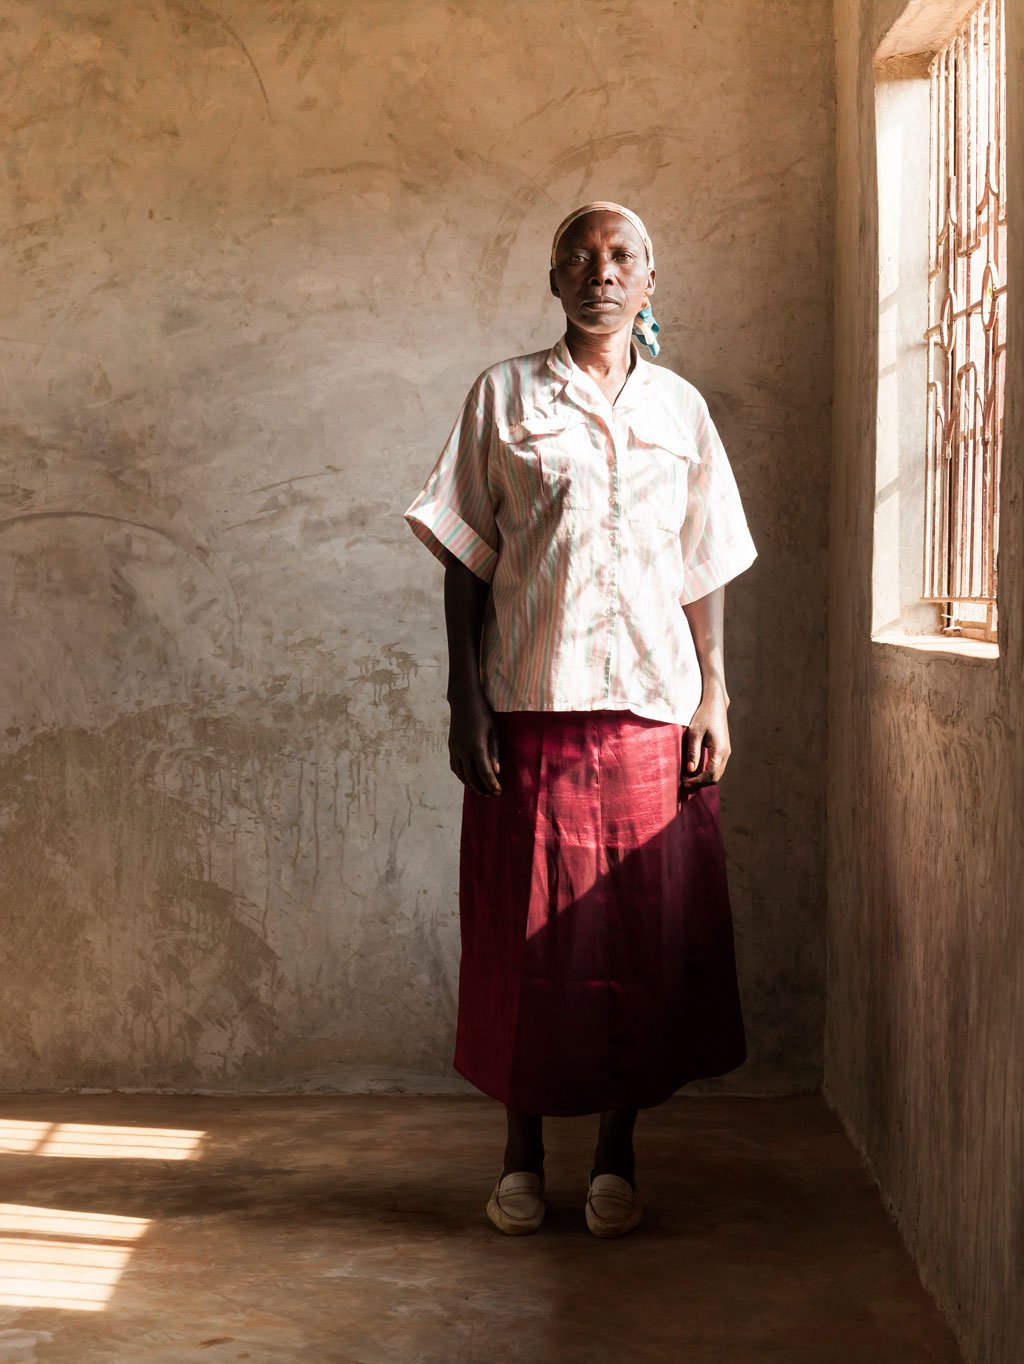 Eric Pawlitzky - The committee of the Aids Widows Self-Help Group of Nyabondo - Felix Schoeller Photoaward